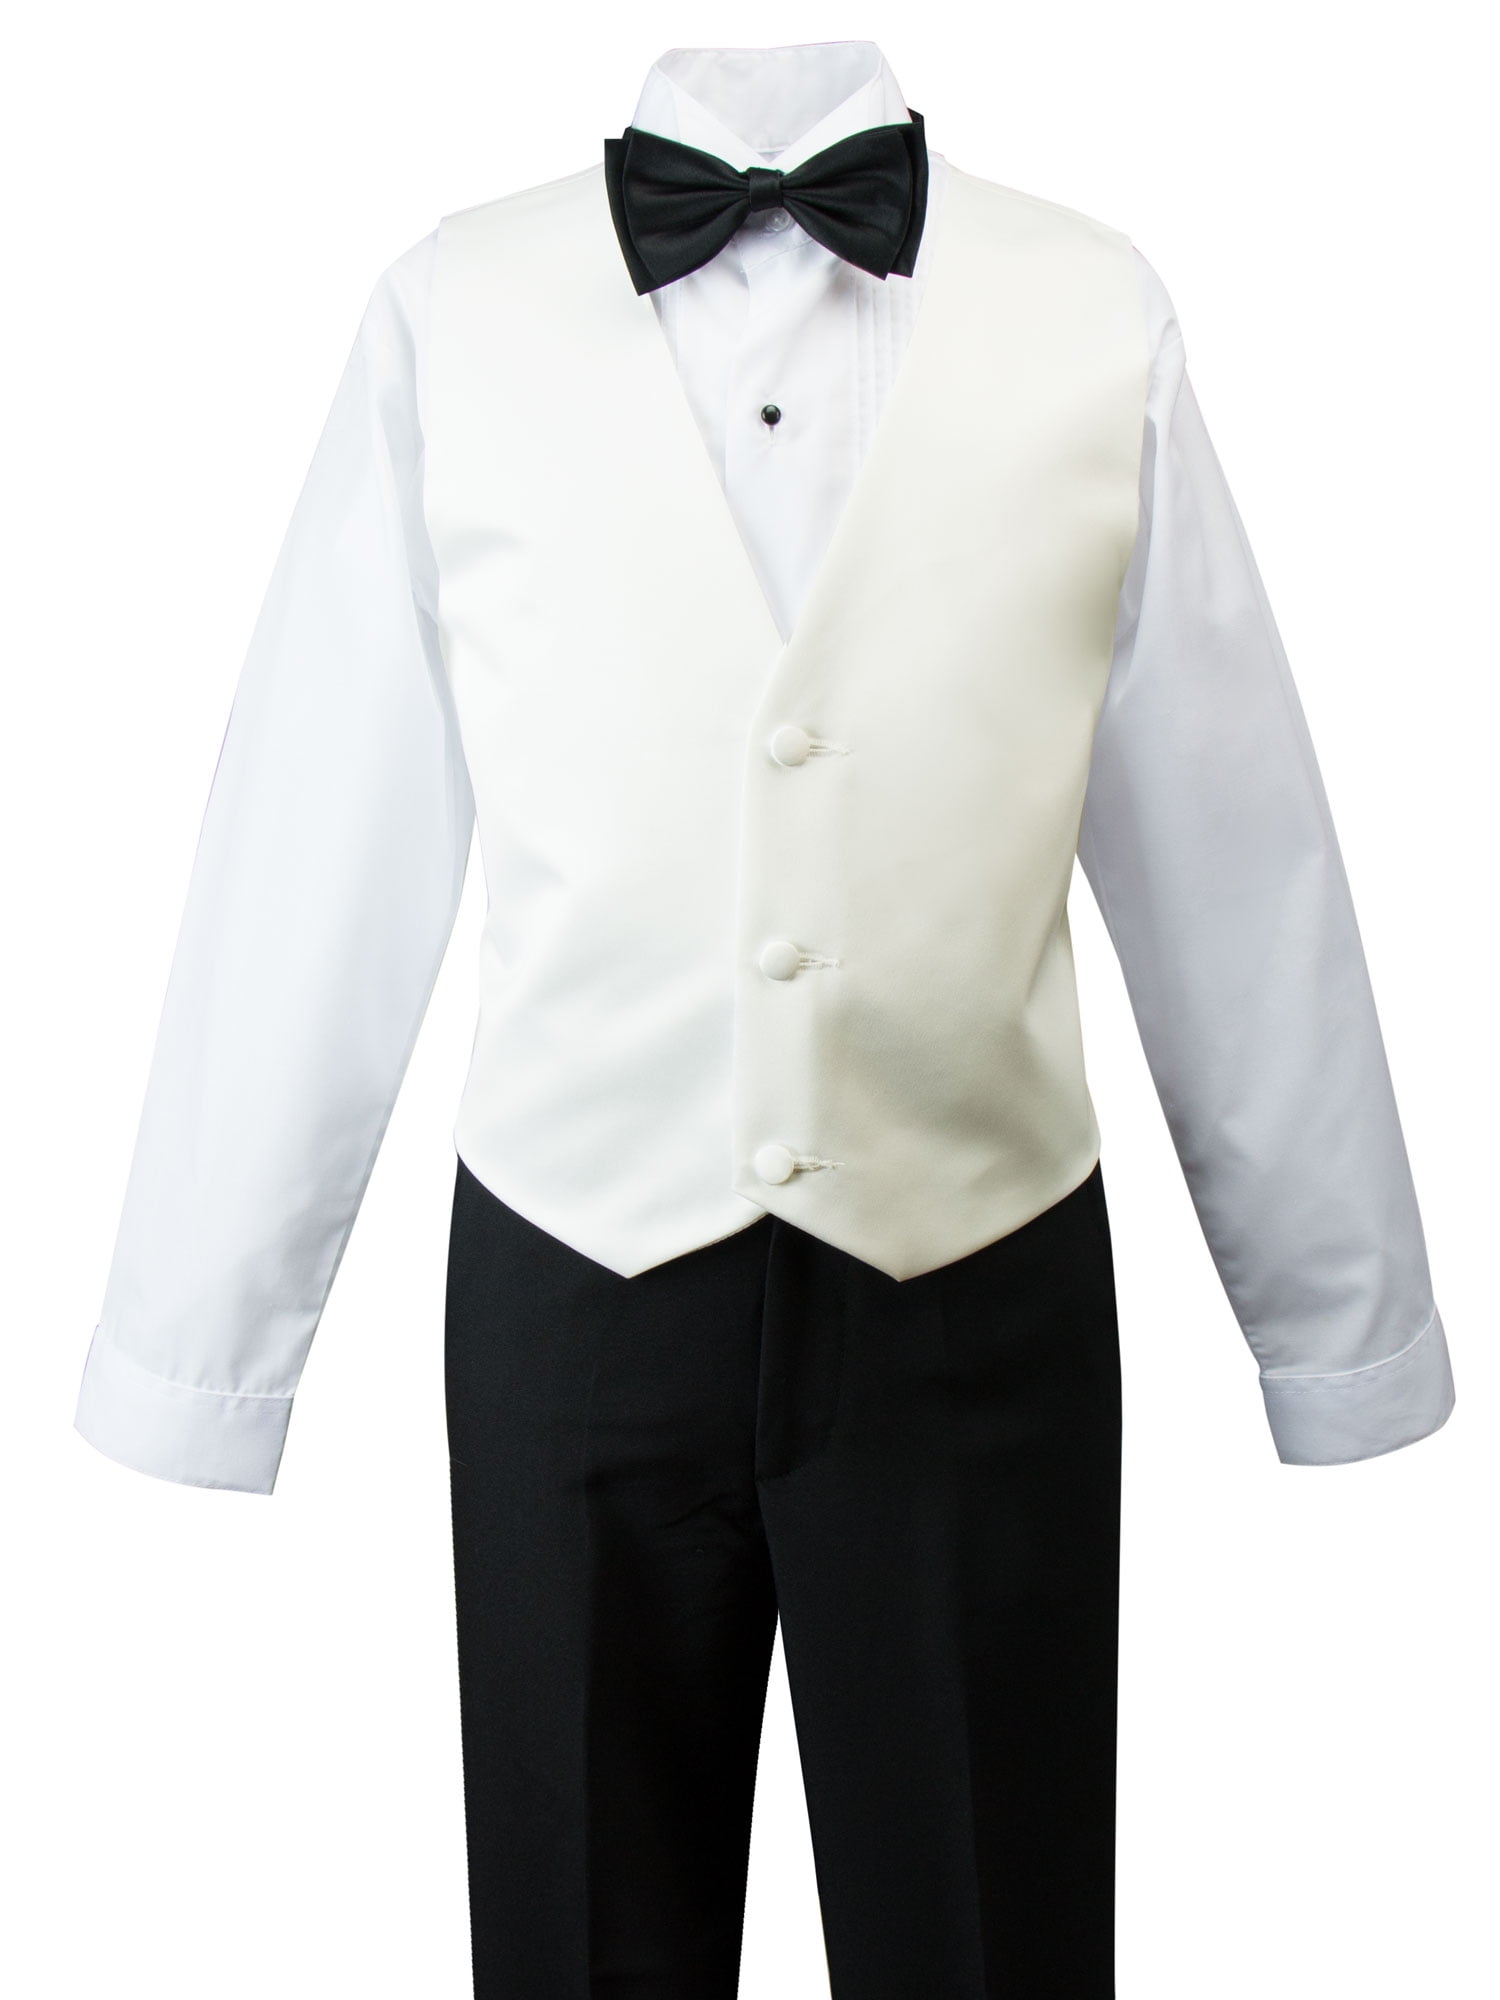 Spring Notion Baby Boys Modern Fit Dress Suit Set with Necktie and Handkerchief